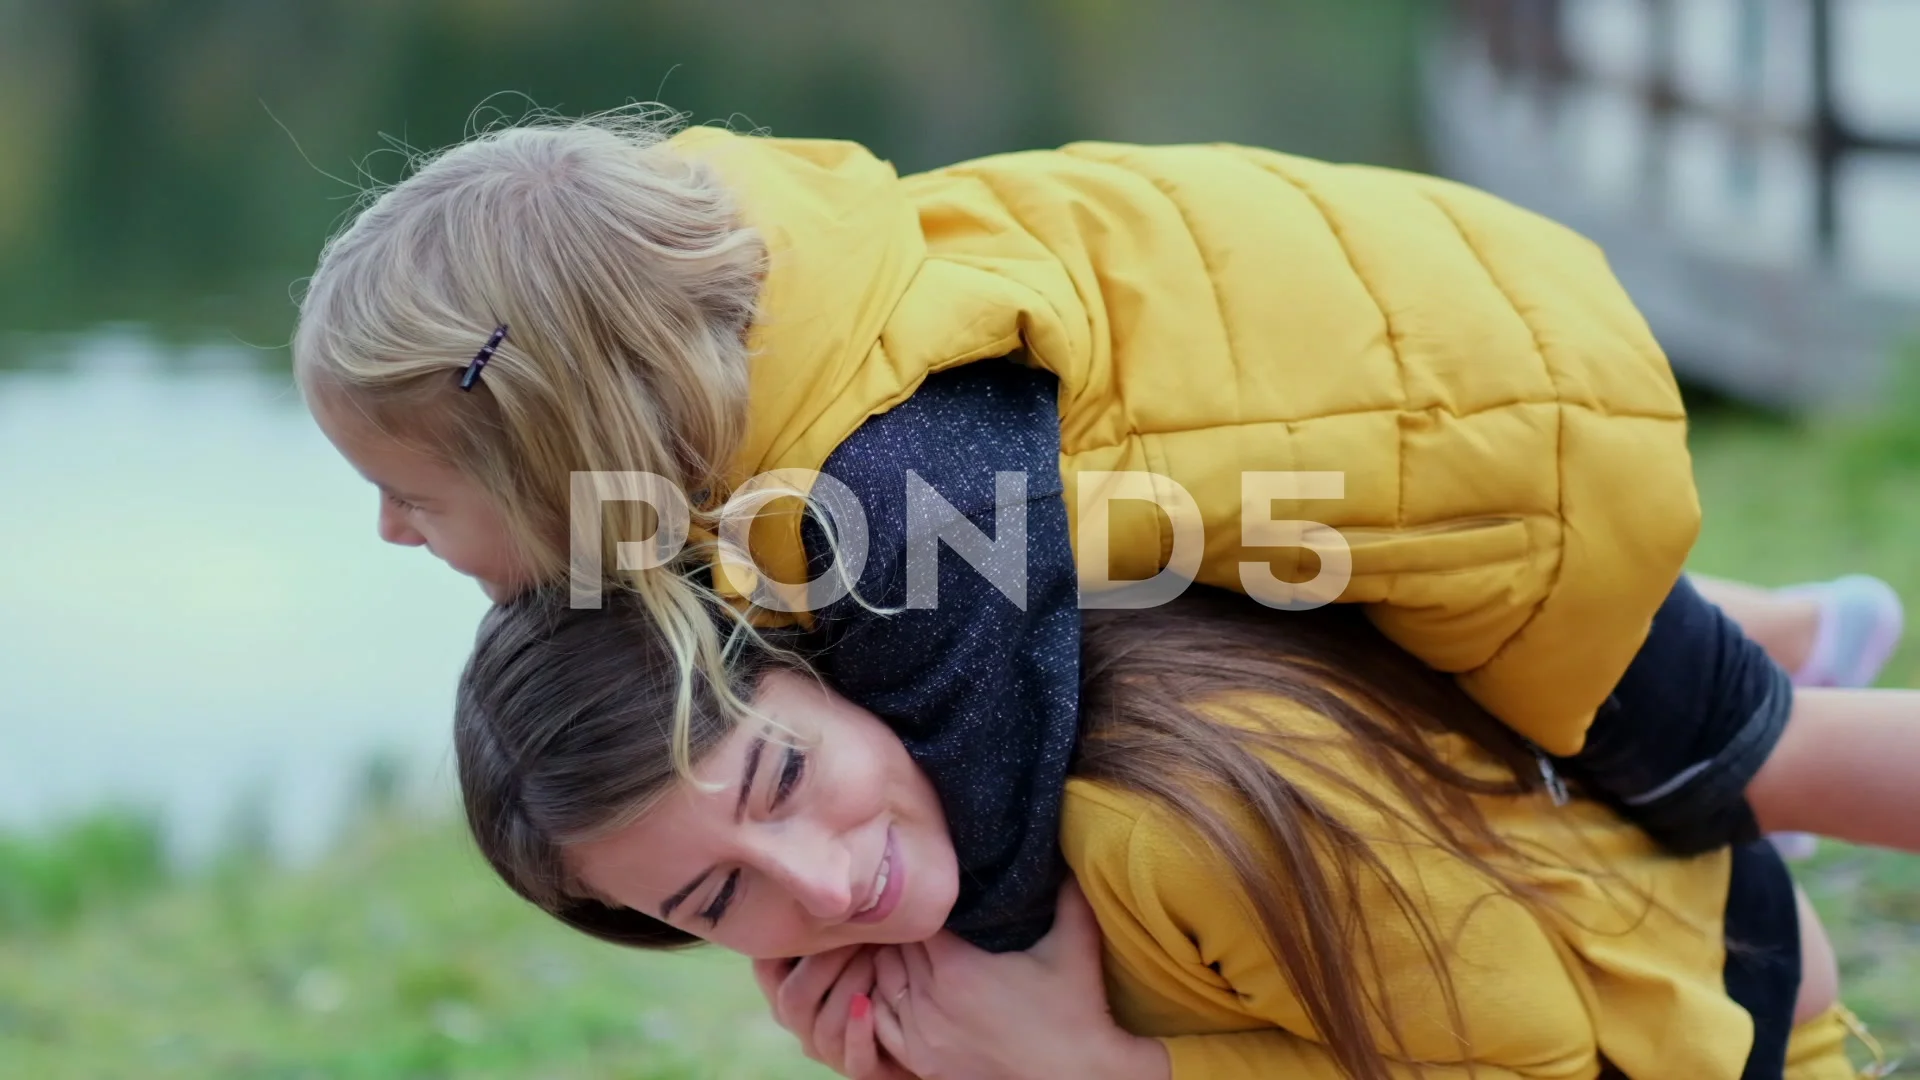 Happy mother giving her son a piggyback ride in the city stock photo